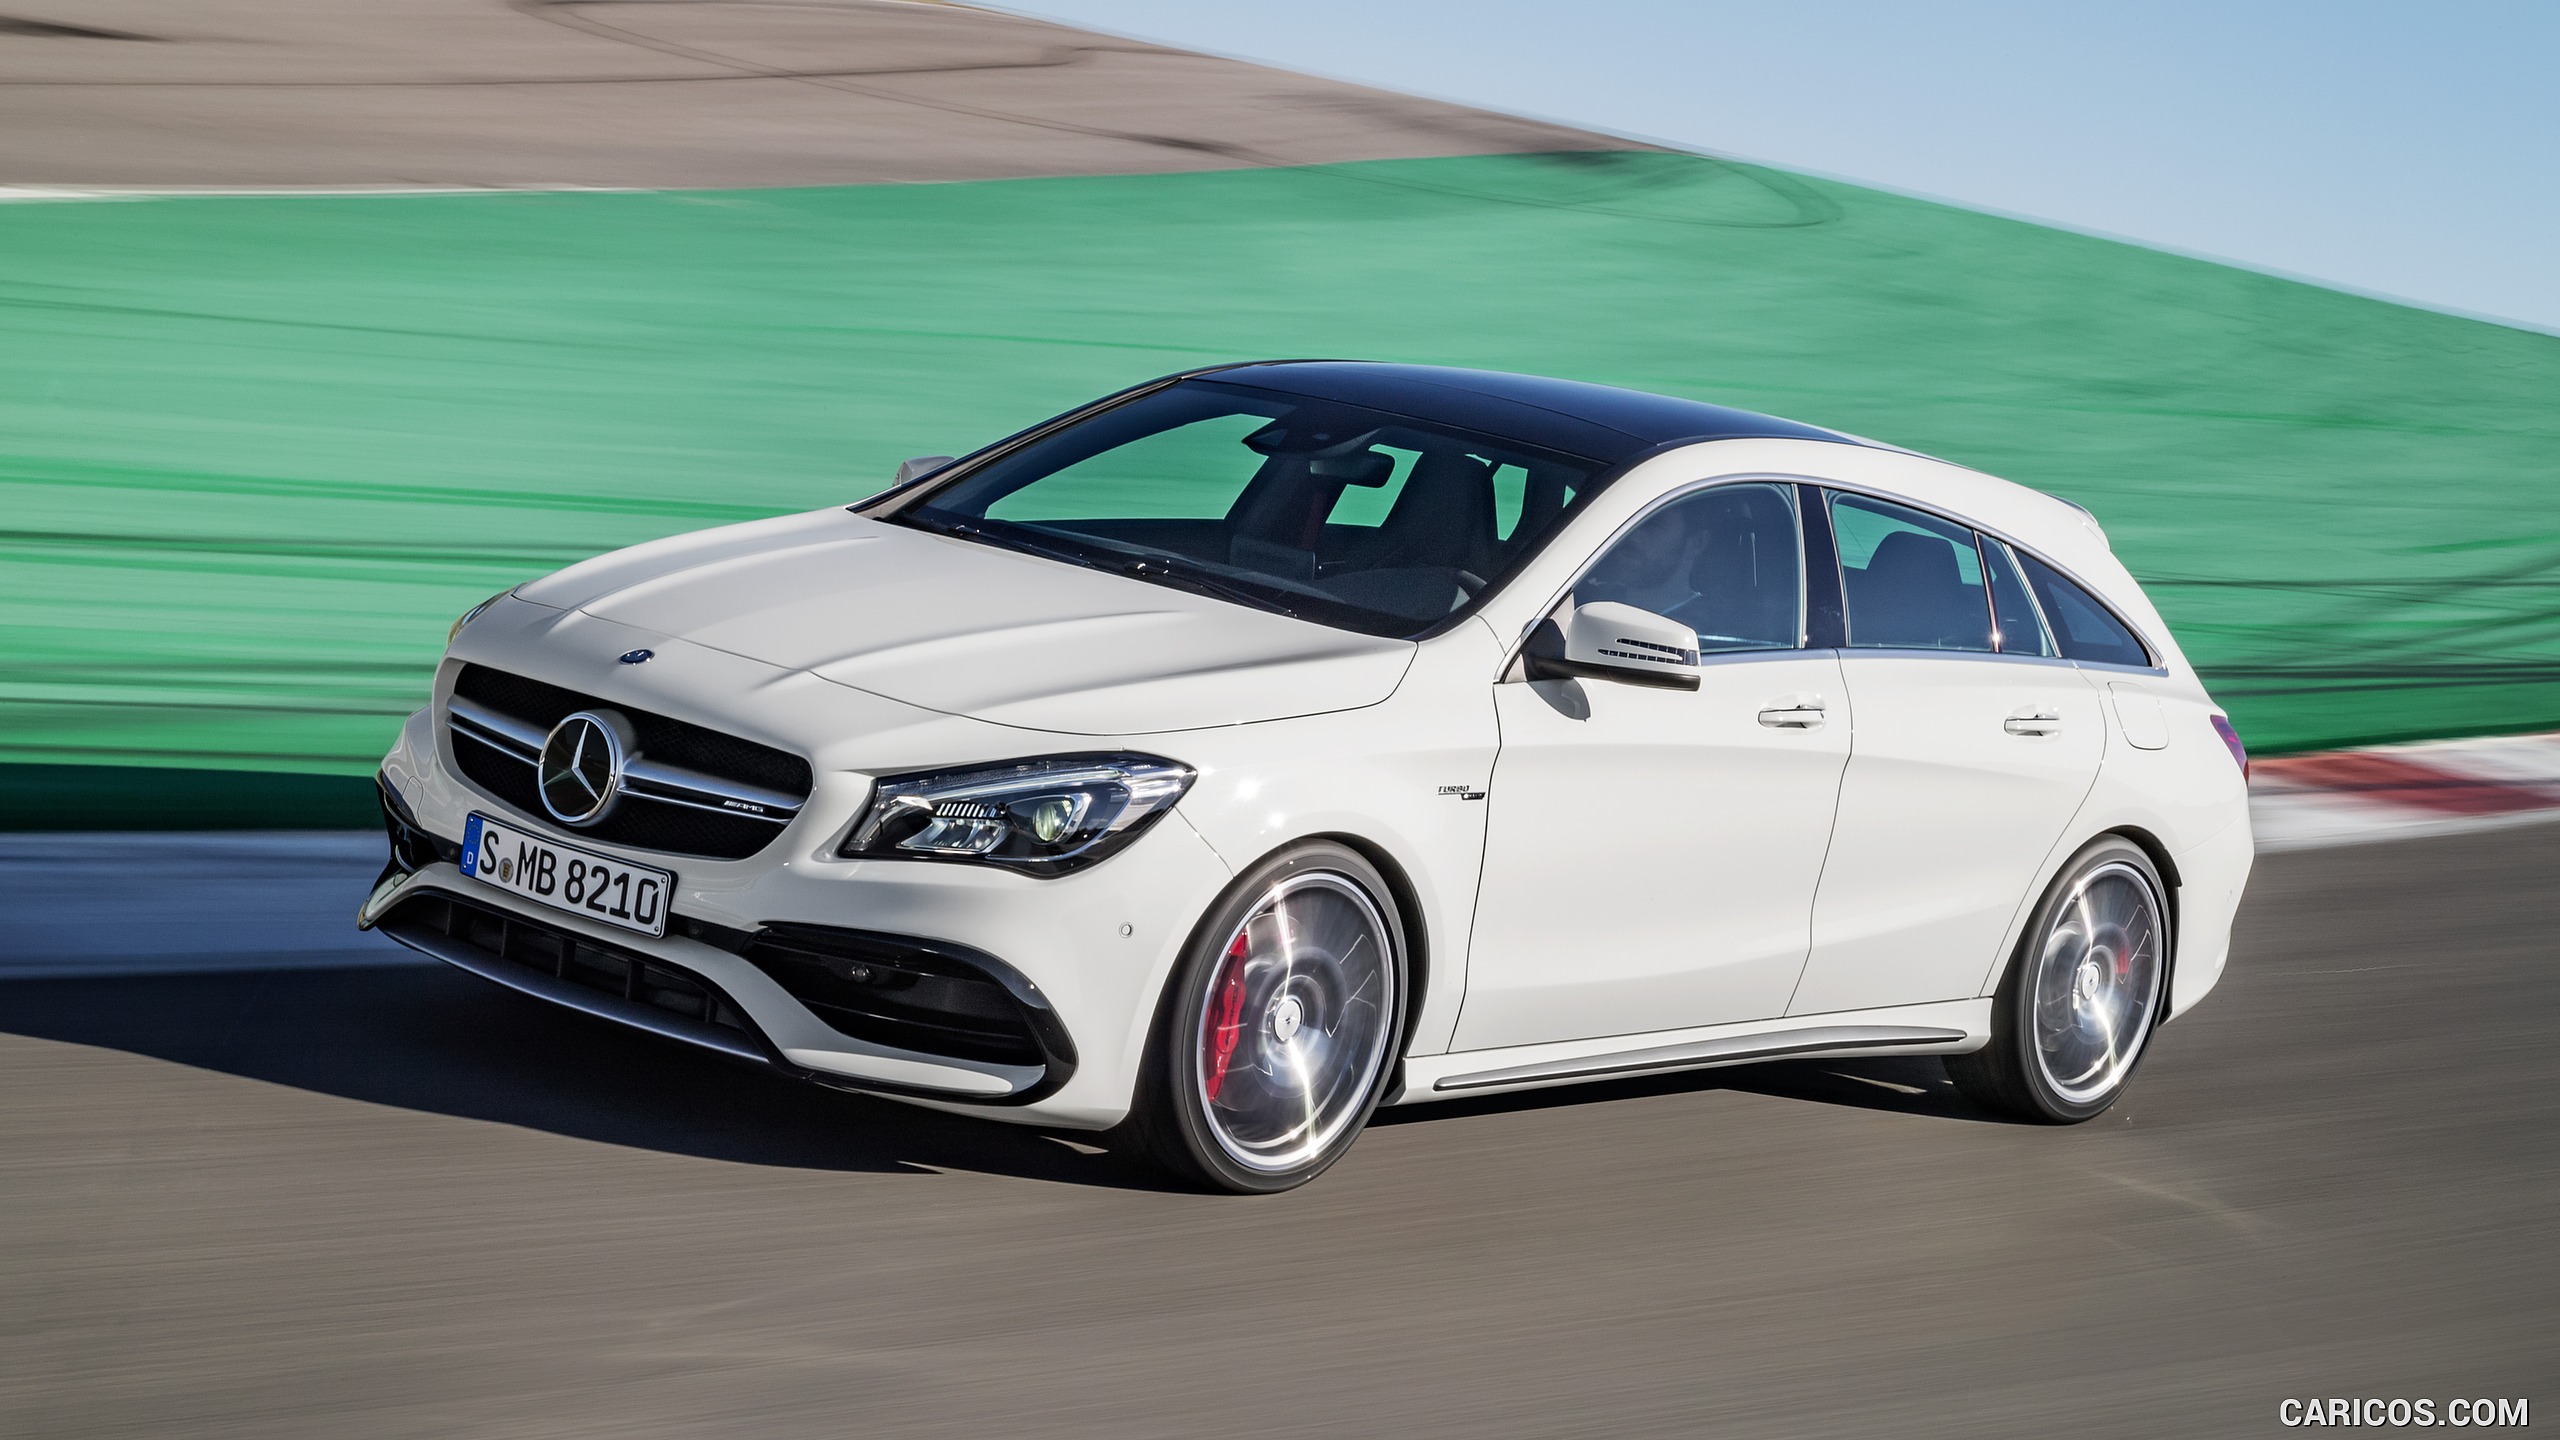 2017 Mercedes-AMG CLA 45 Shooting Brake (Chassis: X117, Color: Diamond White) - Front, #1 of 48